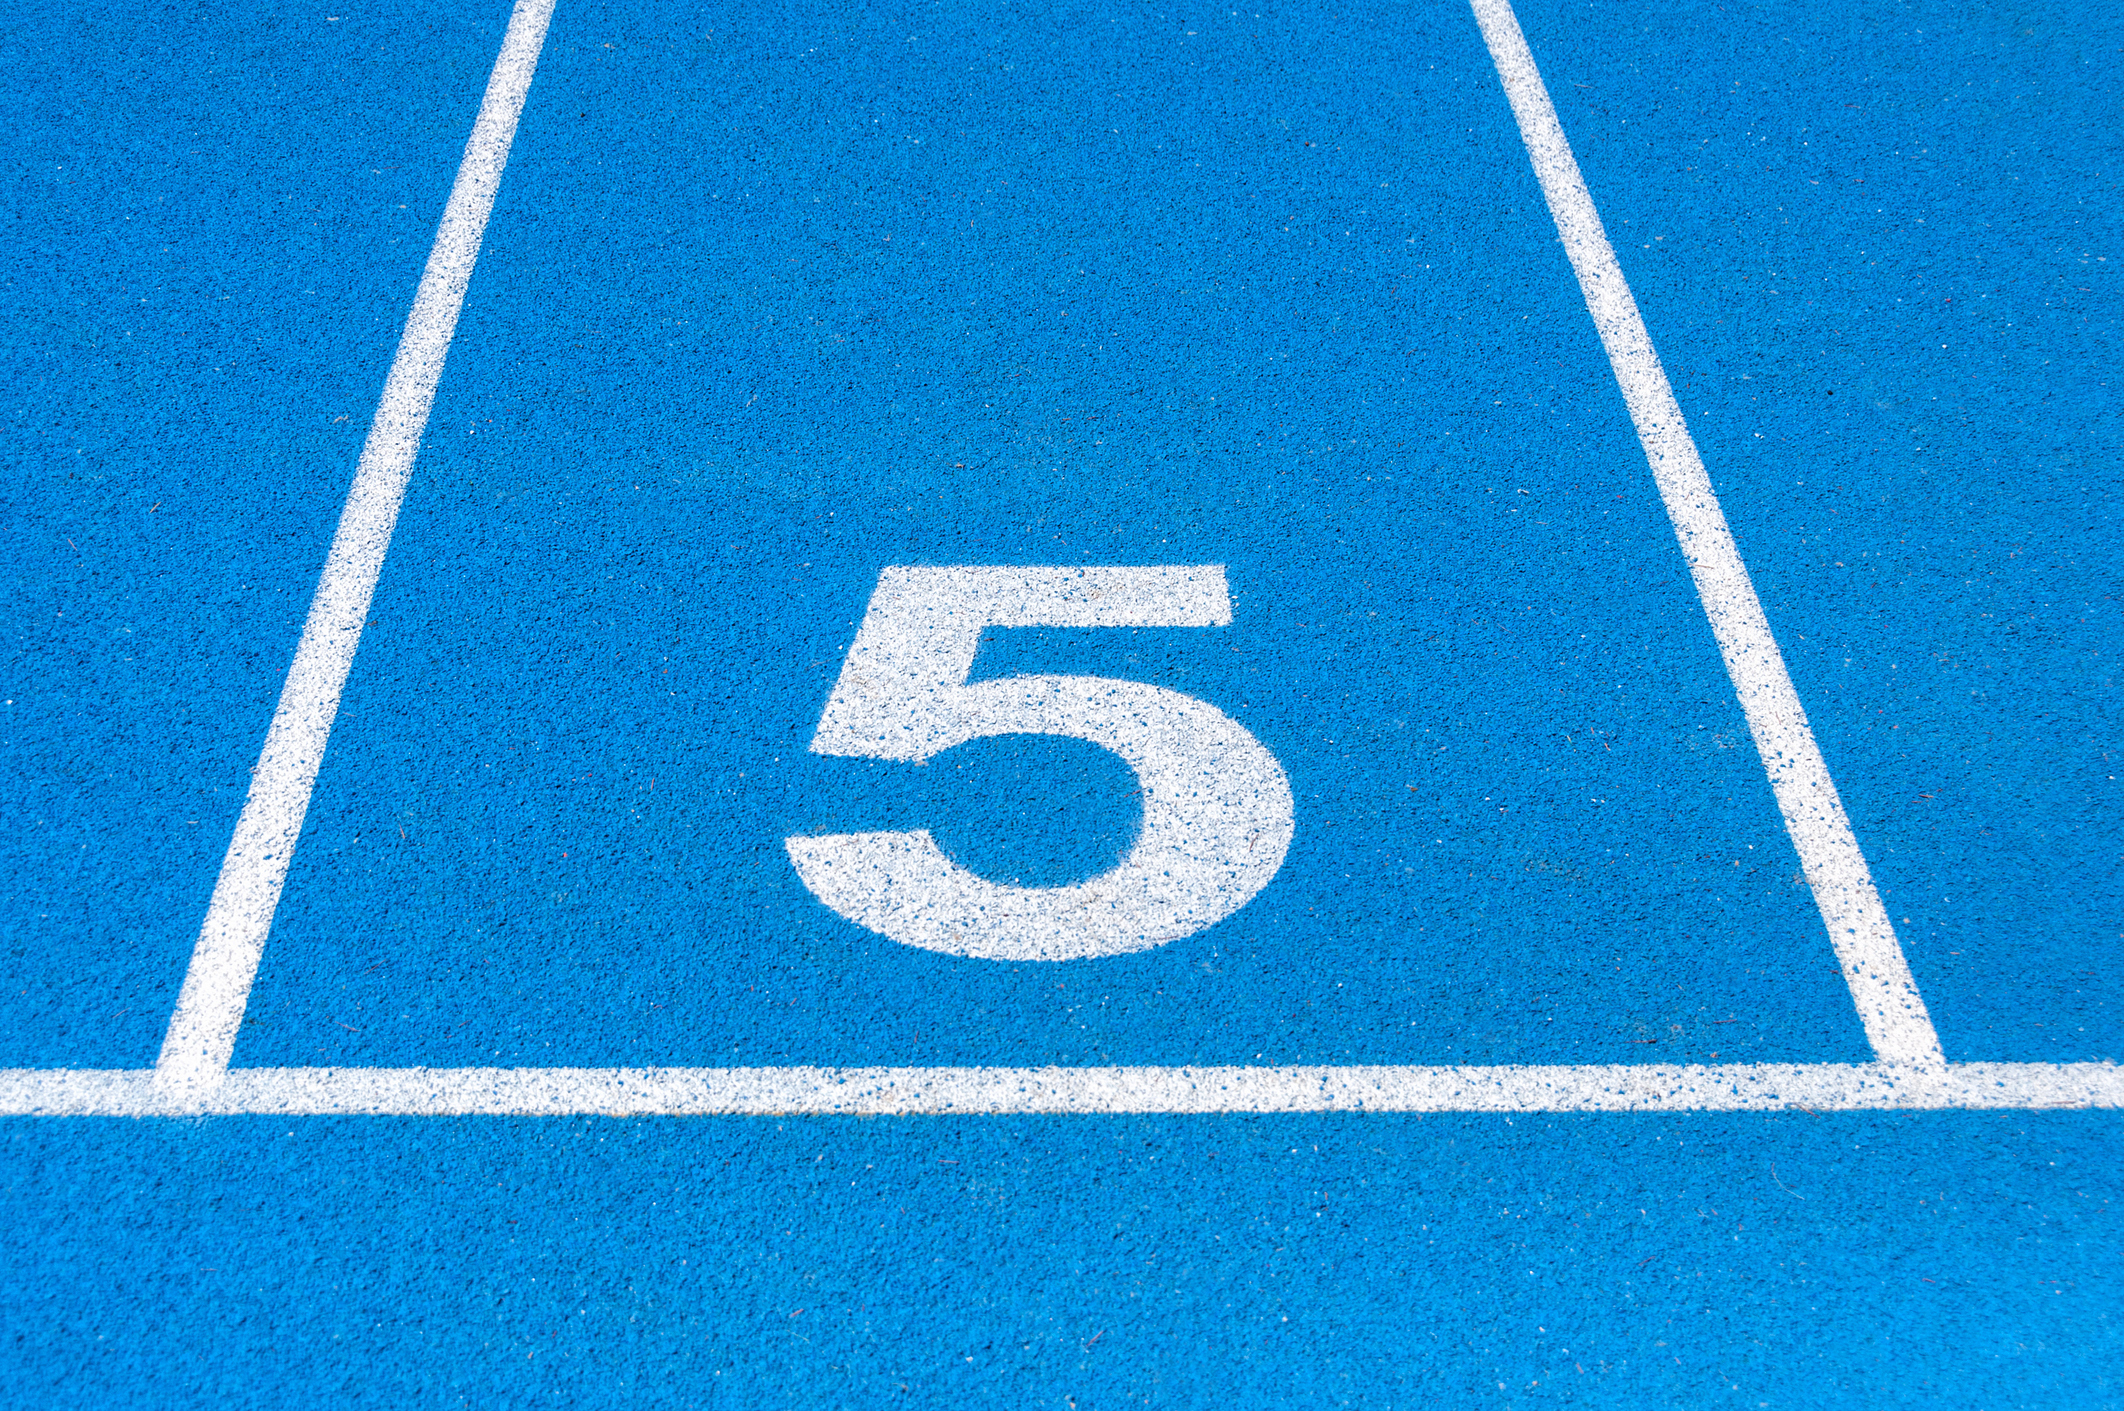 5 Running track with numbered lanes